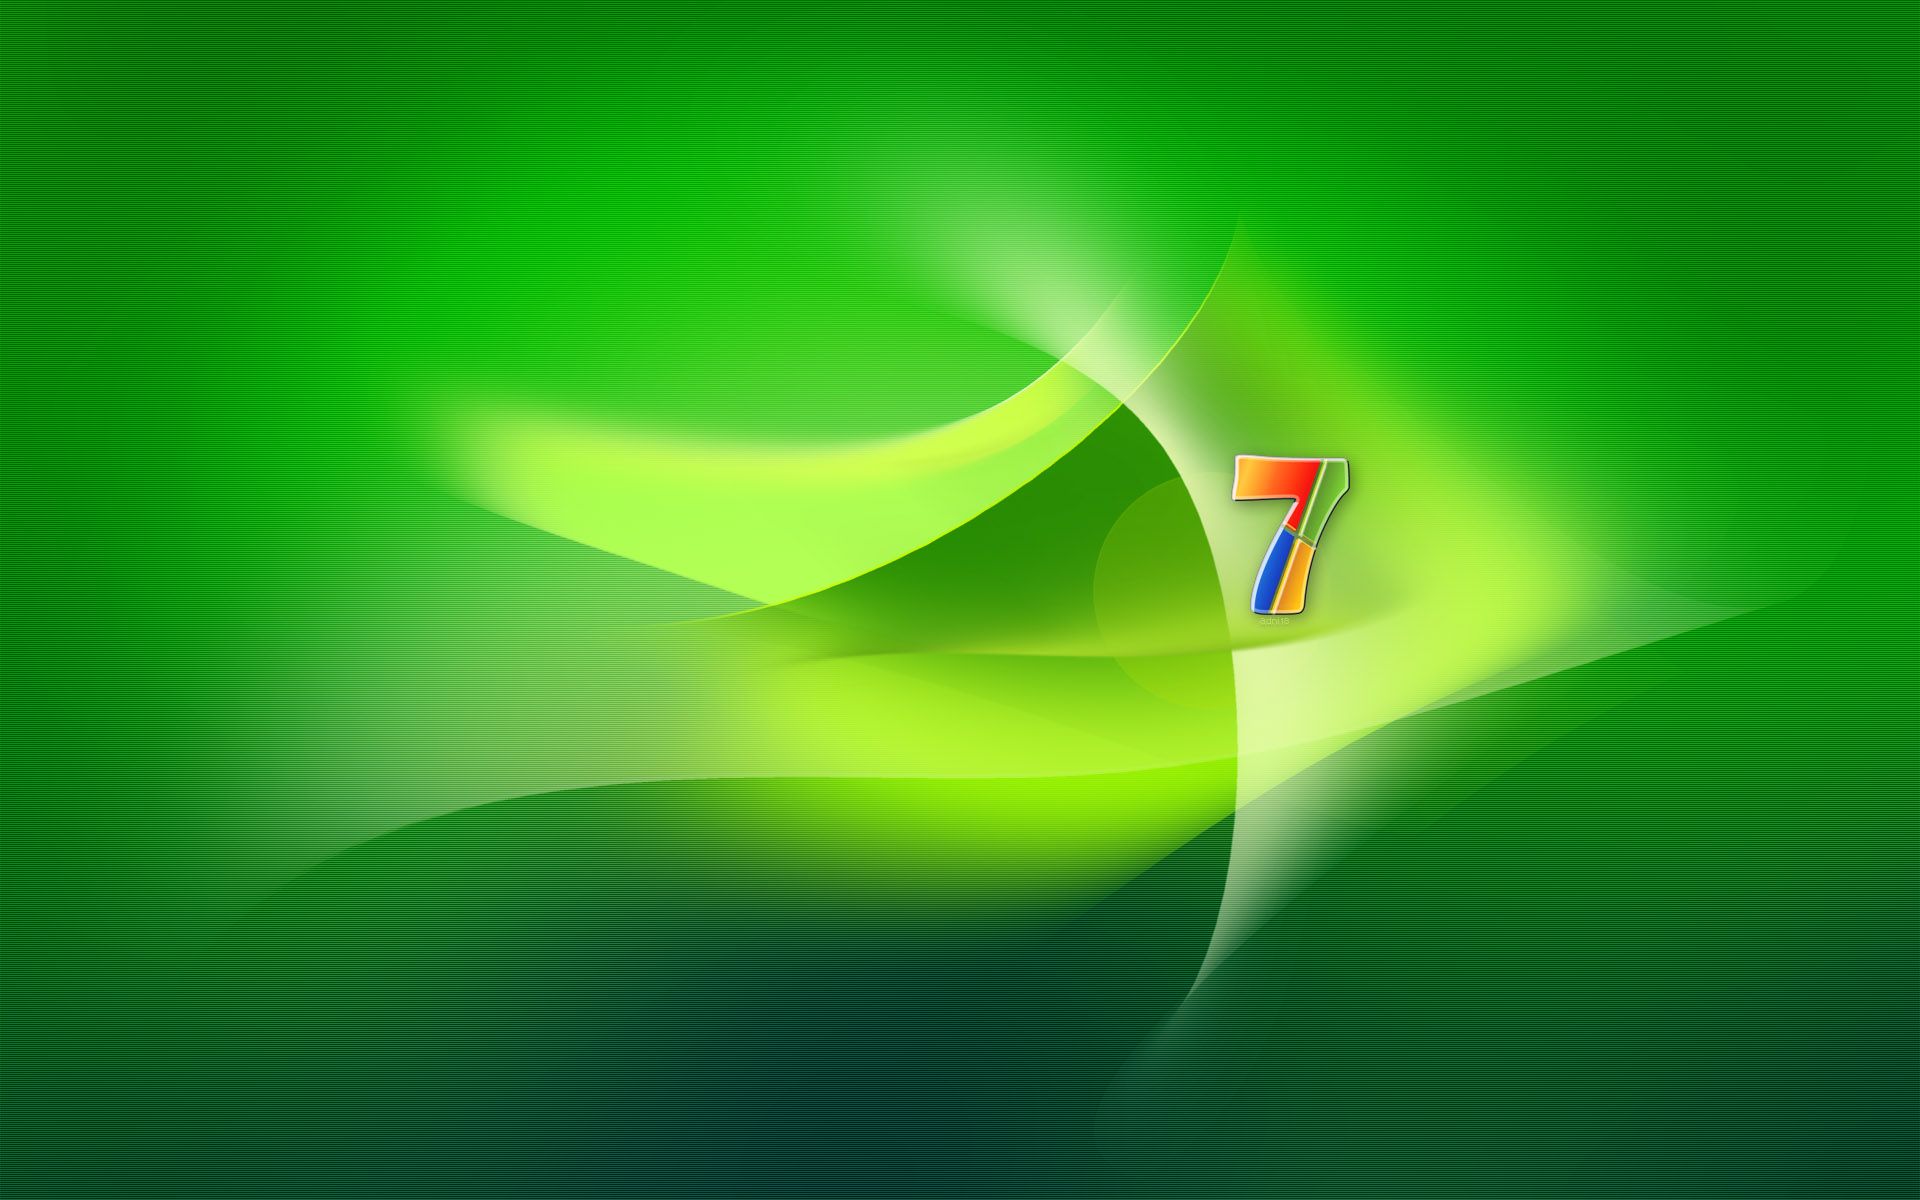 Windows 7 Green wallpapers and images - wallpapers, pictures, photos